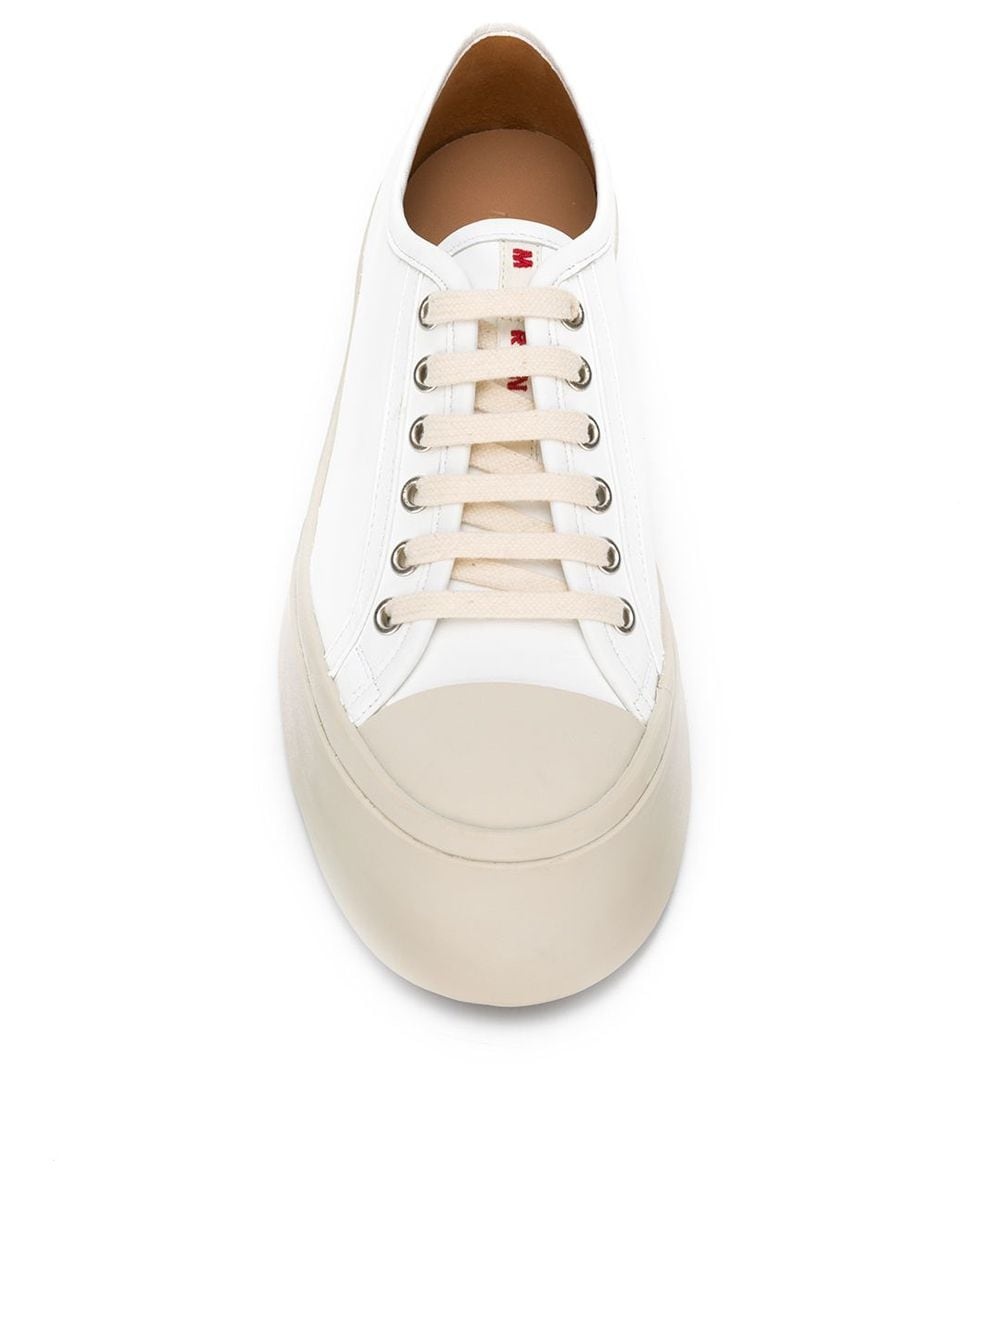 MARNI Women Laced Up Pablo Smooth Calf Leather Sneaker - 3